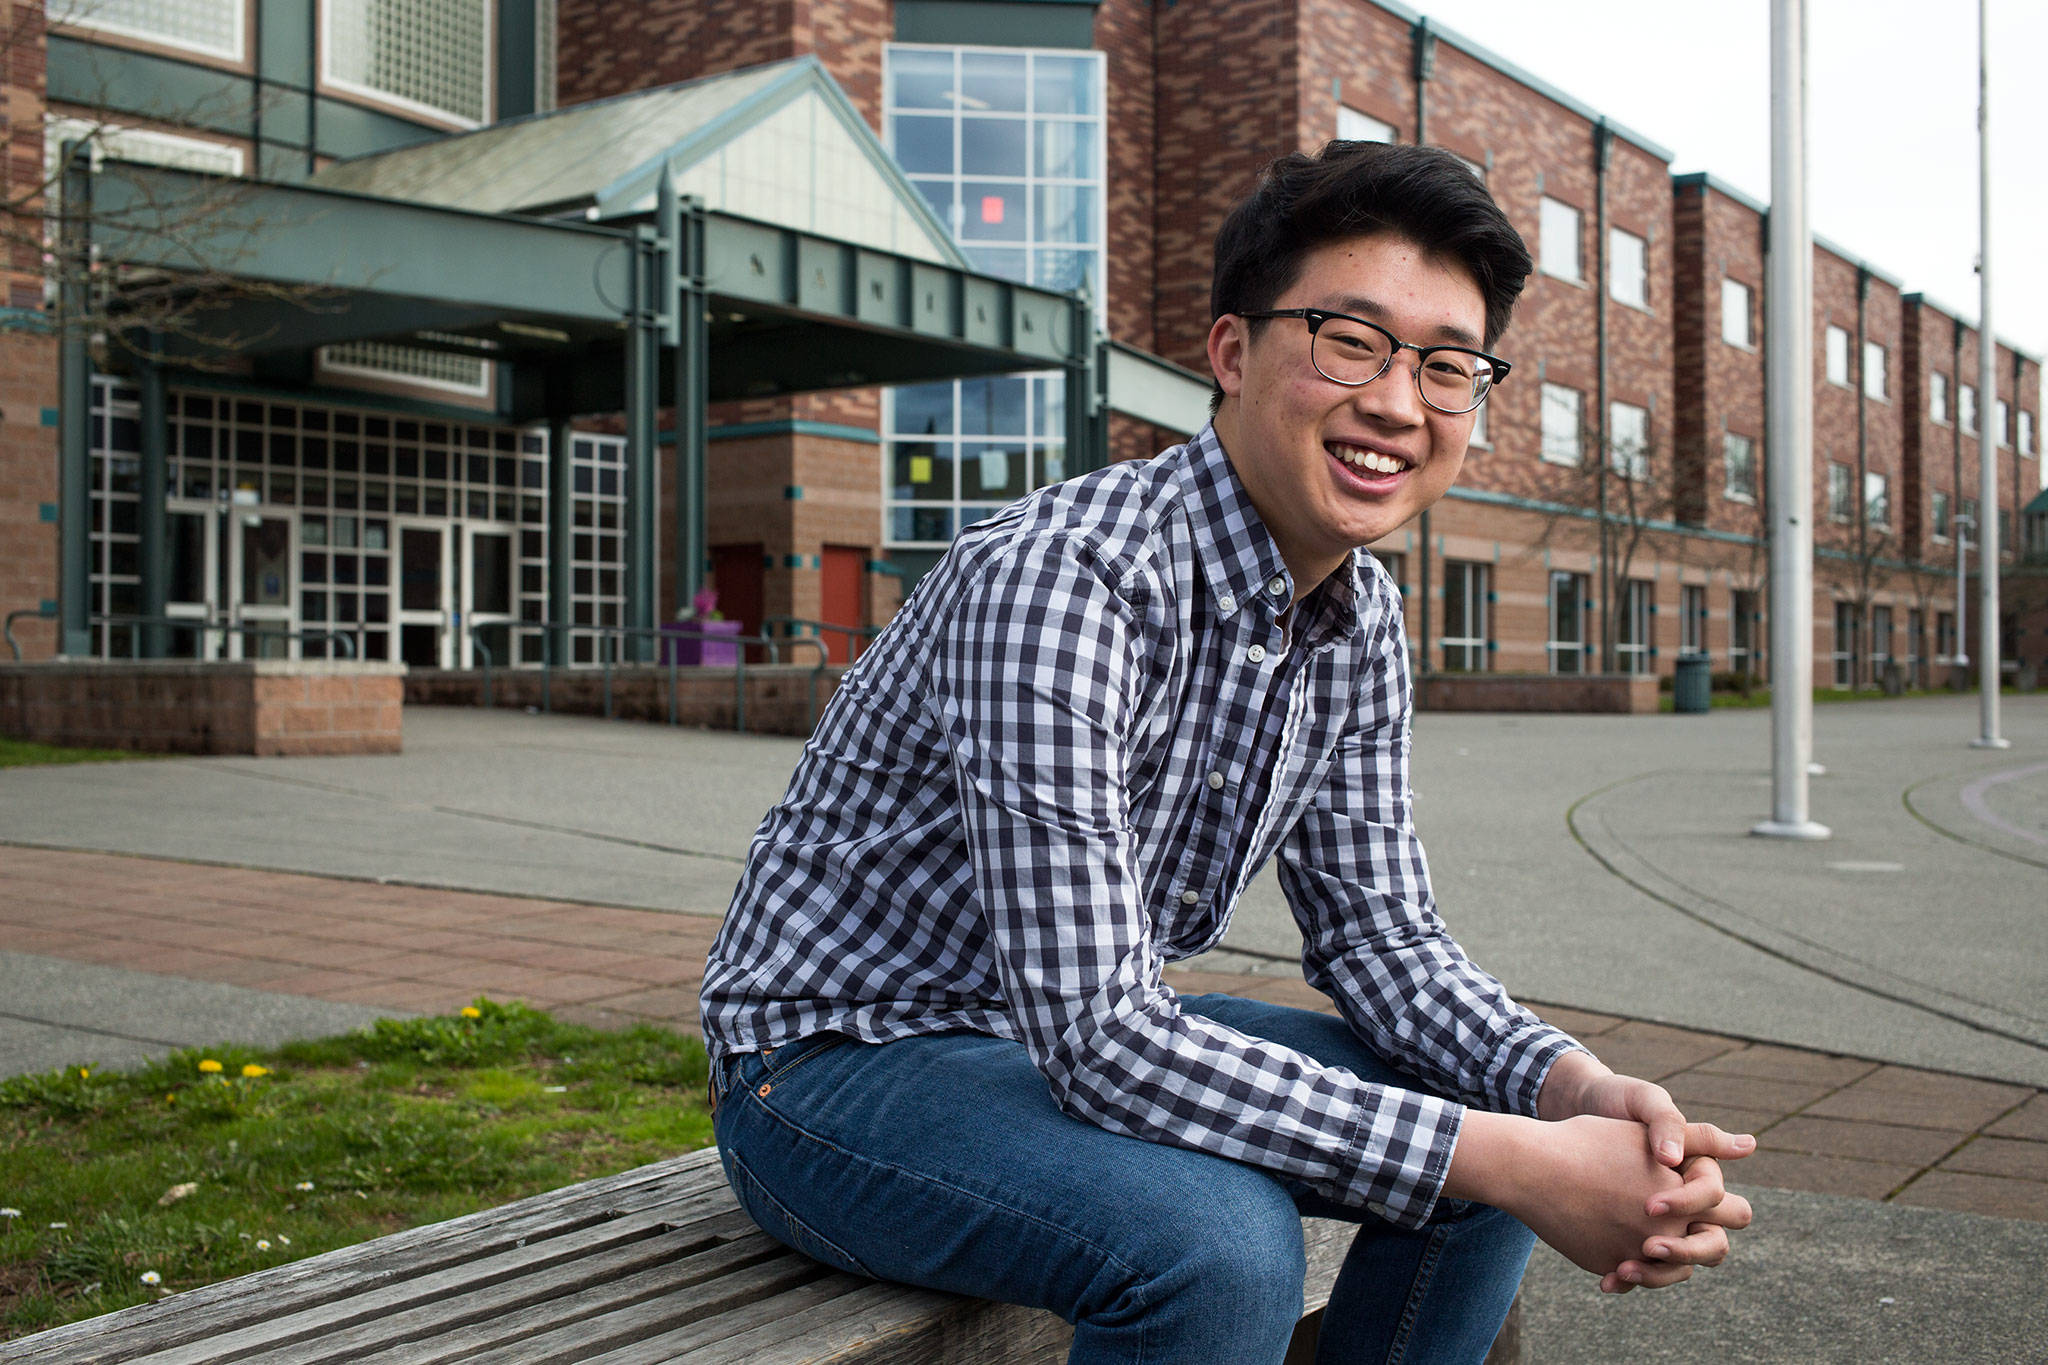 Kamiak High junior Andrew Shin earned a top score of 1600 on his SAT test. (Andy Bronson / The Herald)